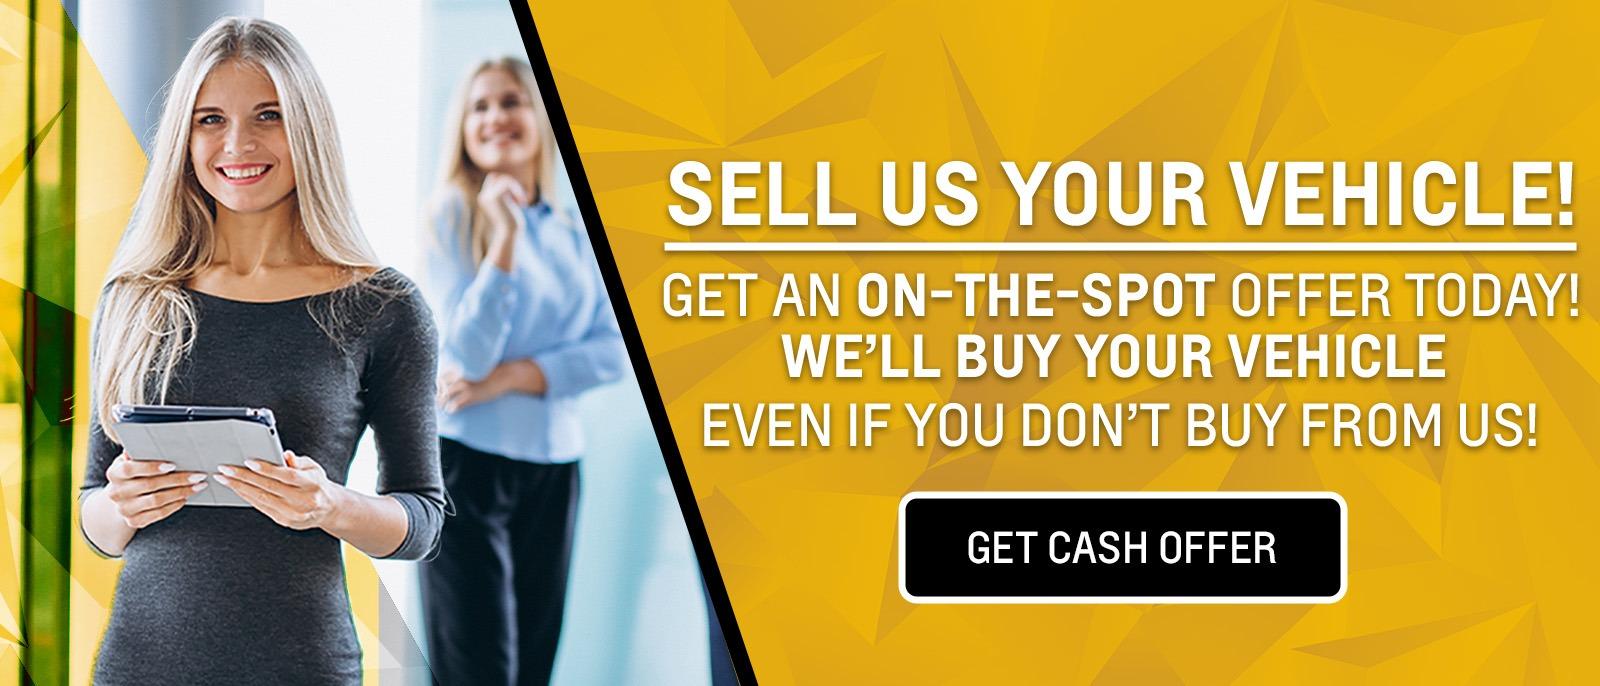 SELL US YOUR VEHICLE! Get an on the spot cash offer today! We'll buy your vehicle even if you don't buy from us.